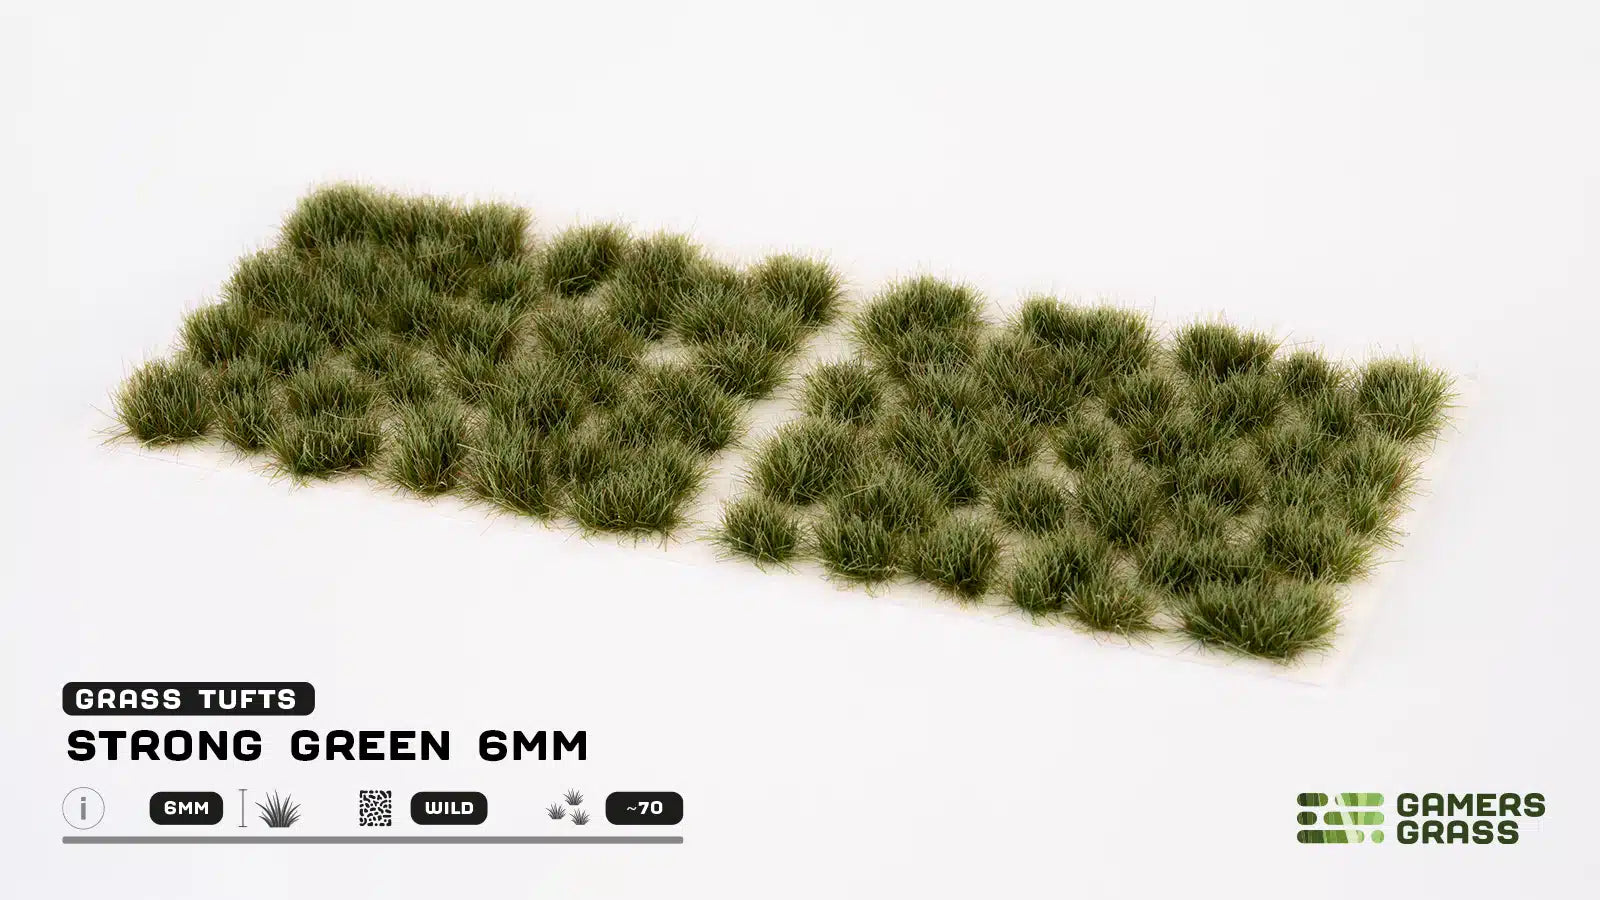 Strong Green 6mm Tufts (Wild) - Gamers Grass - 0